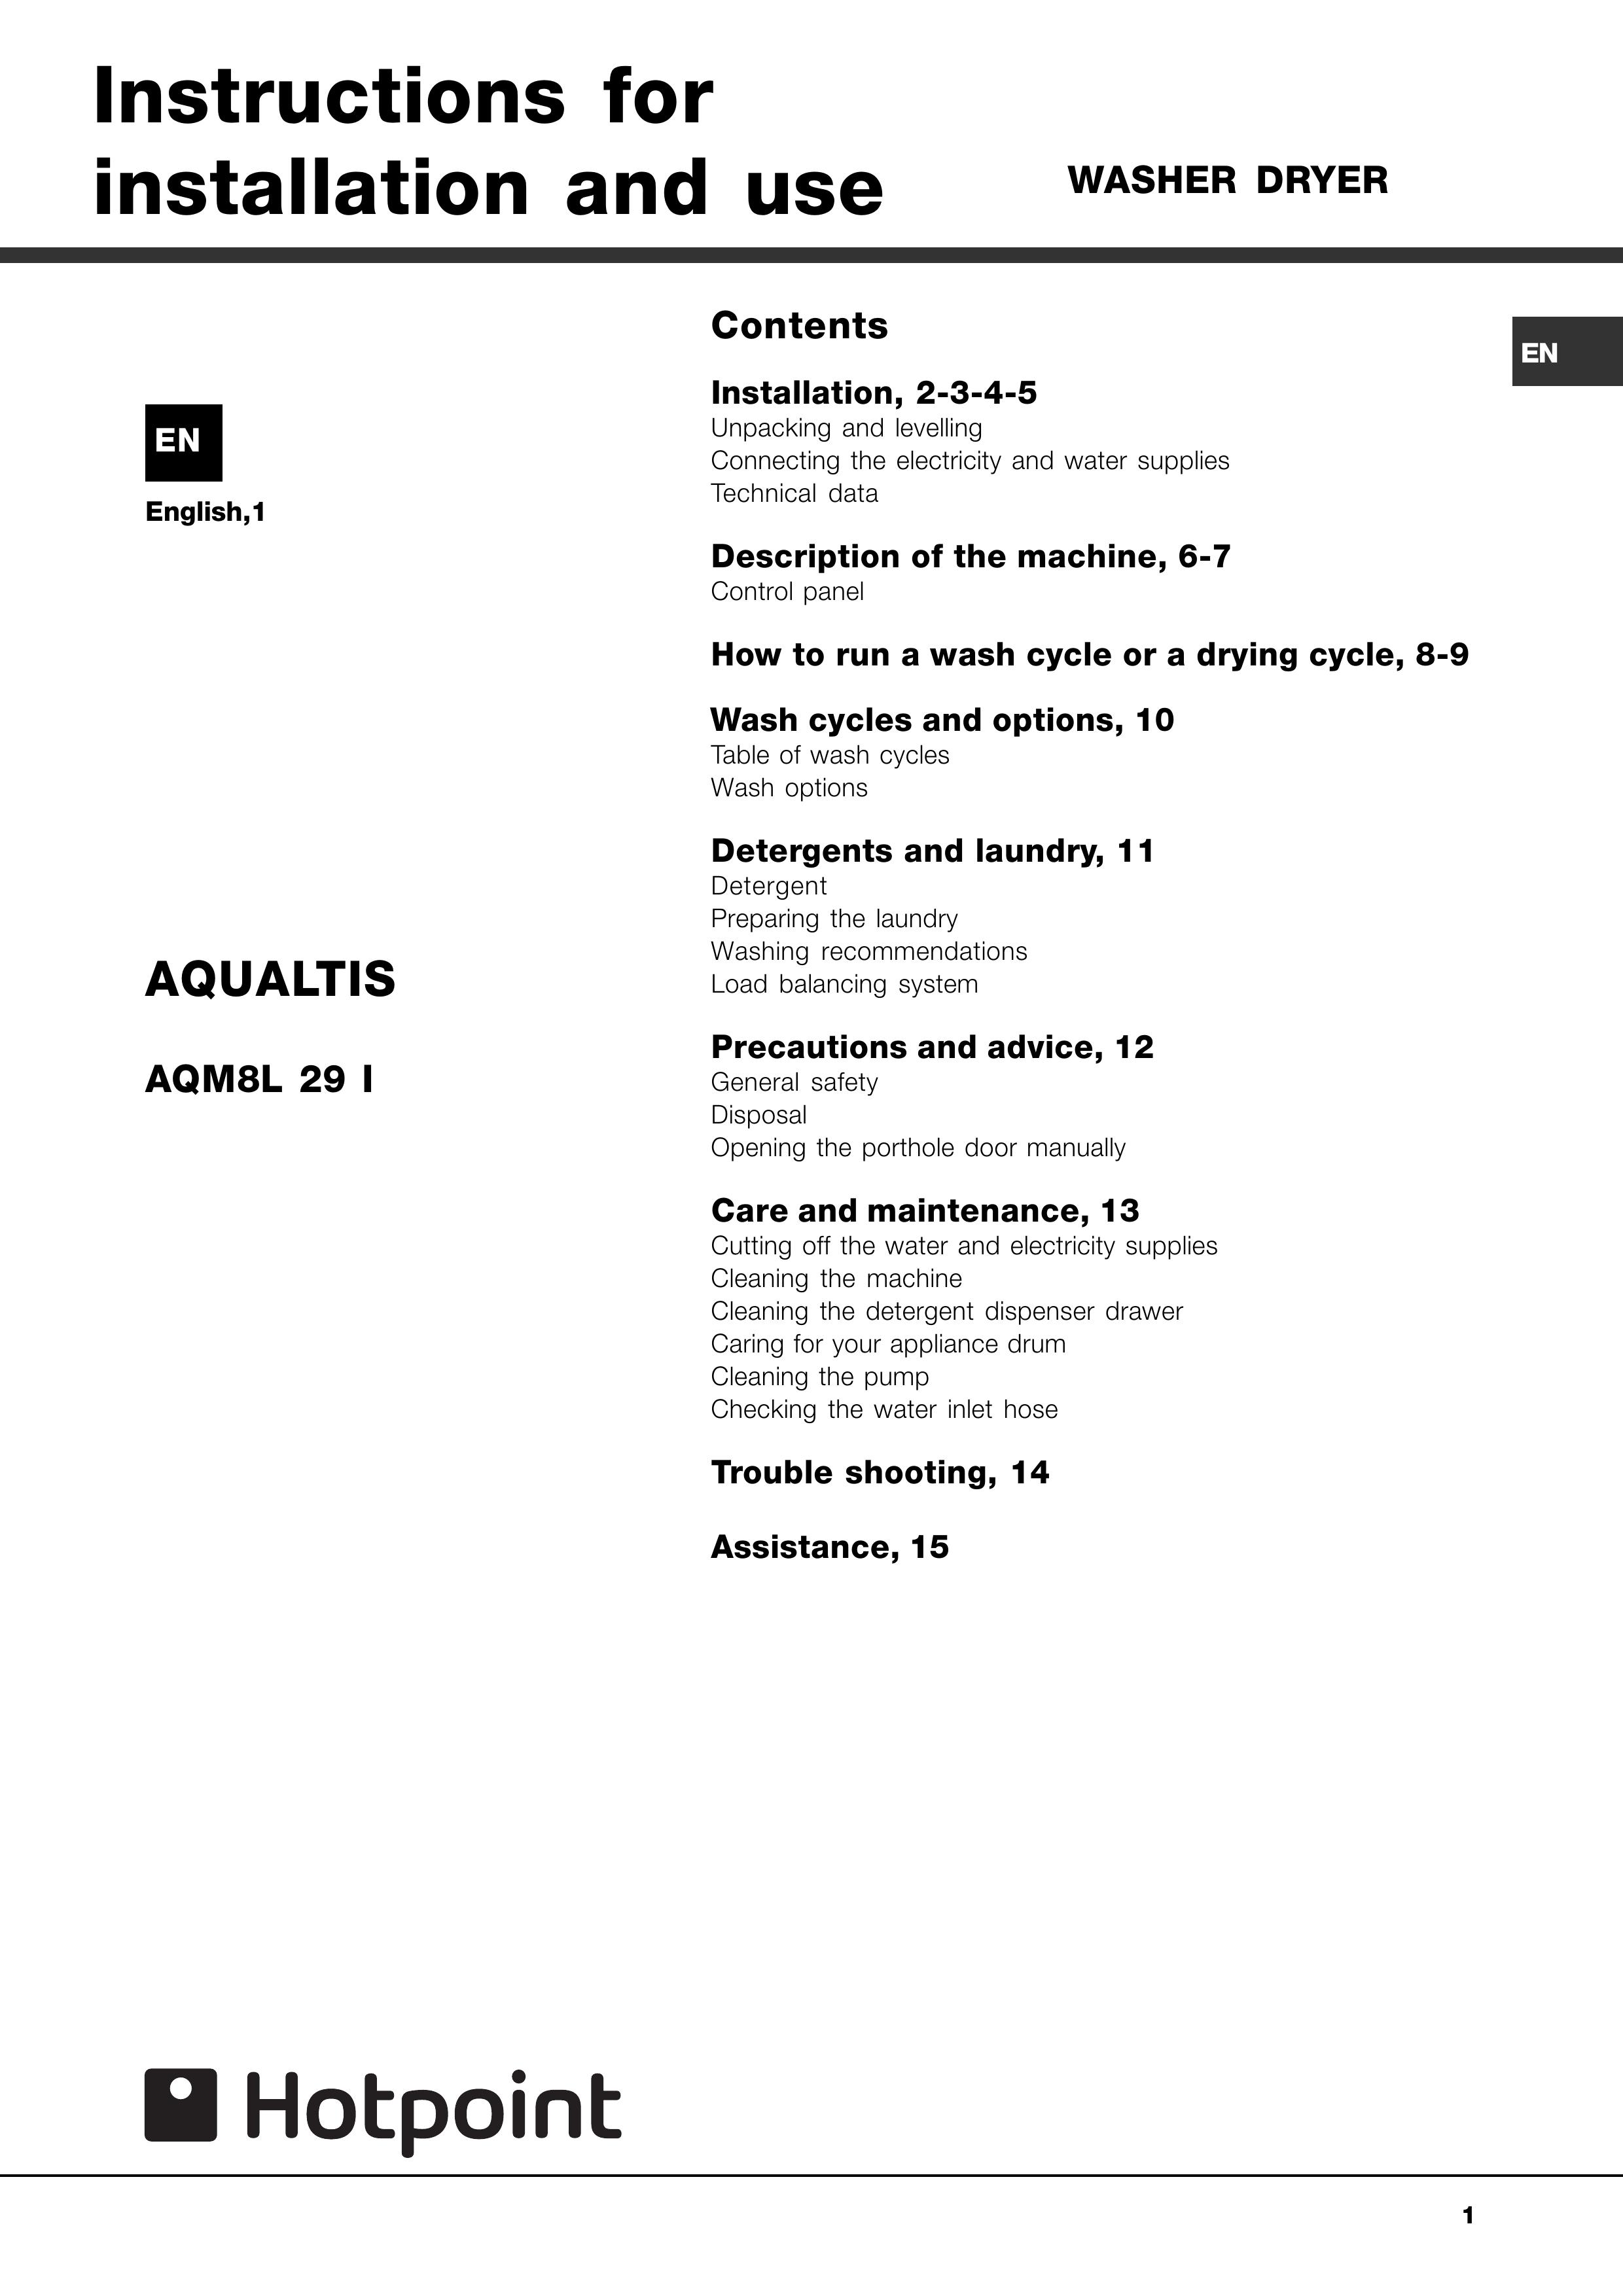 Hotpoint aqm8l 29 l Washer User Manual